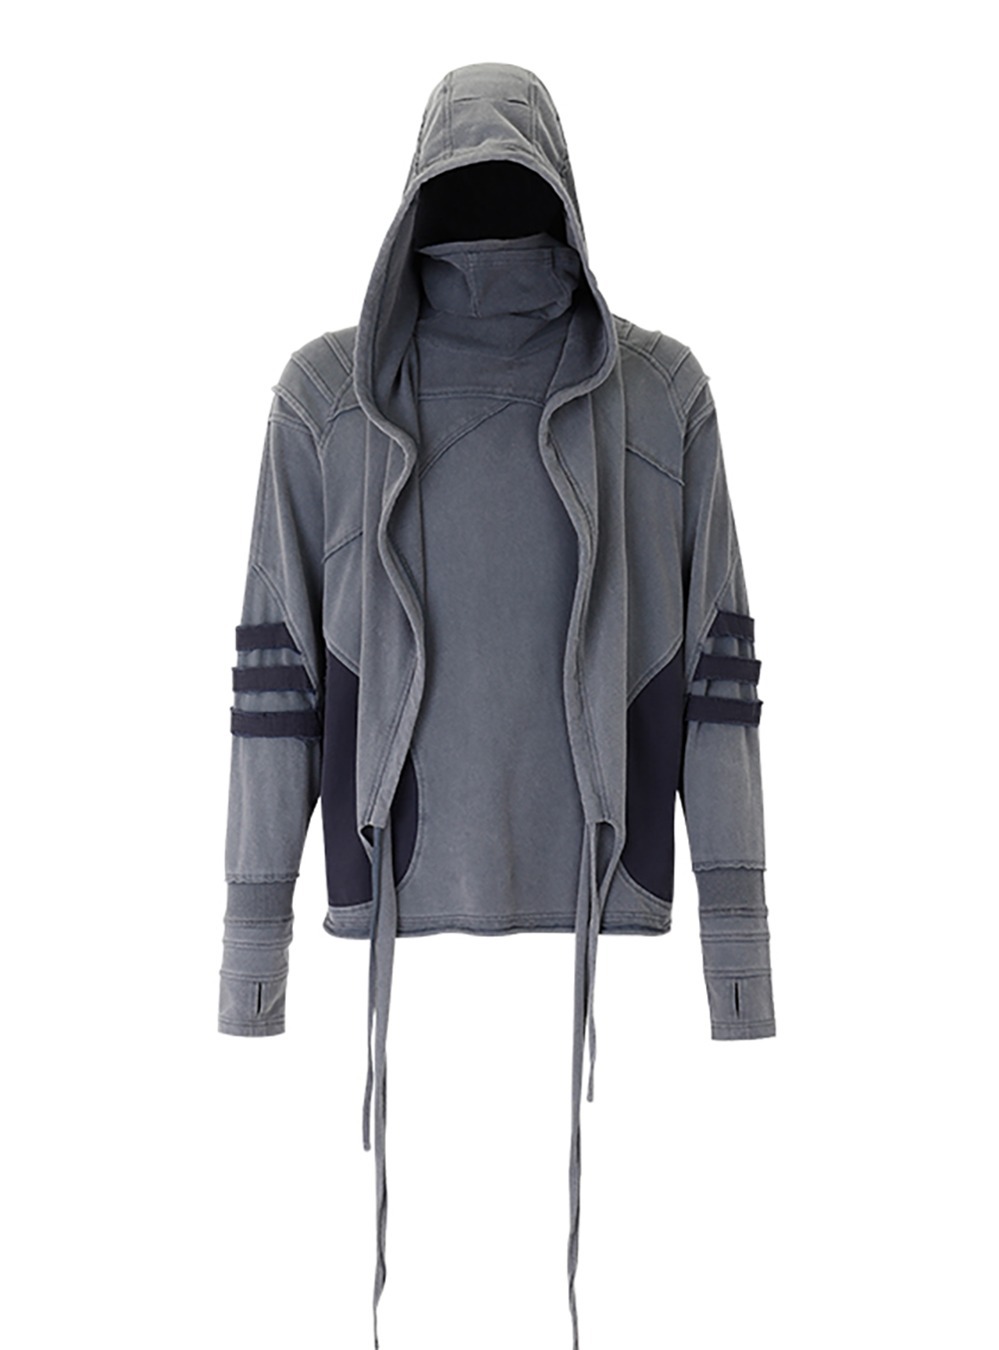 [D5OVE] Distressed Splice Structured Hooded Sweat Shirt